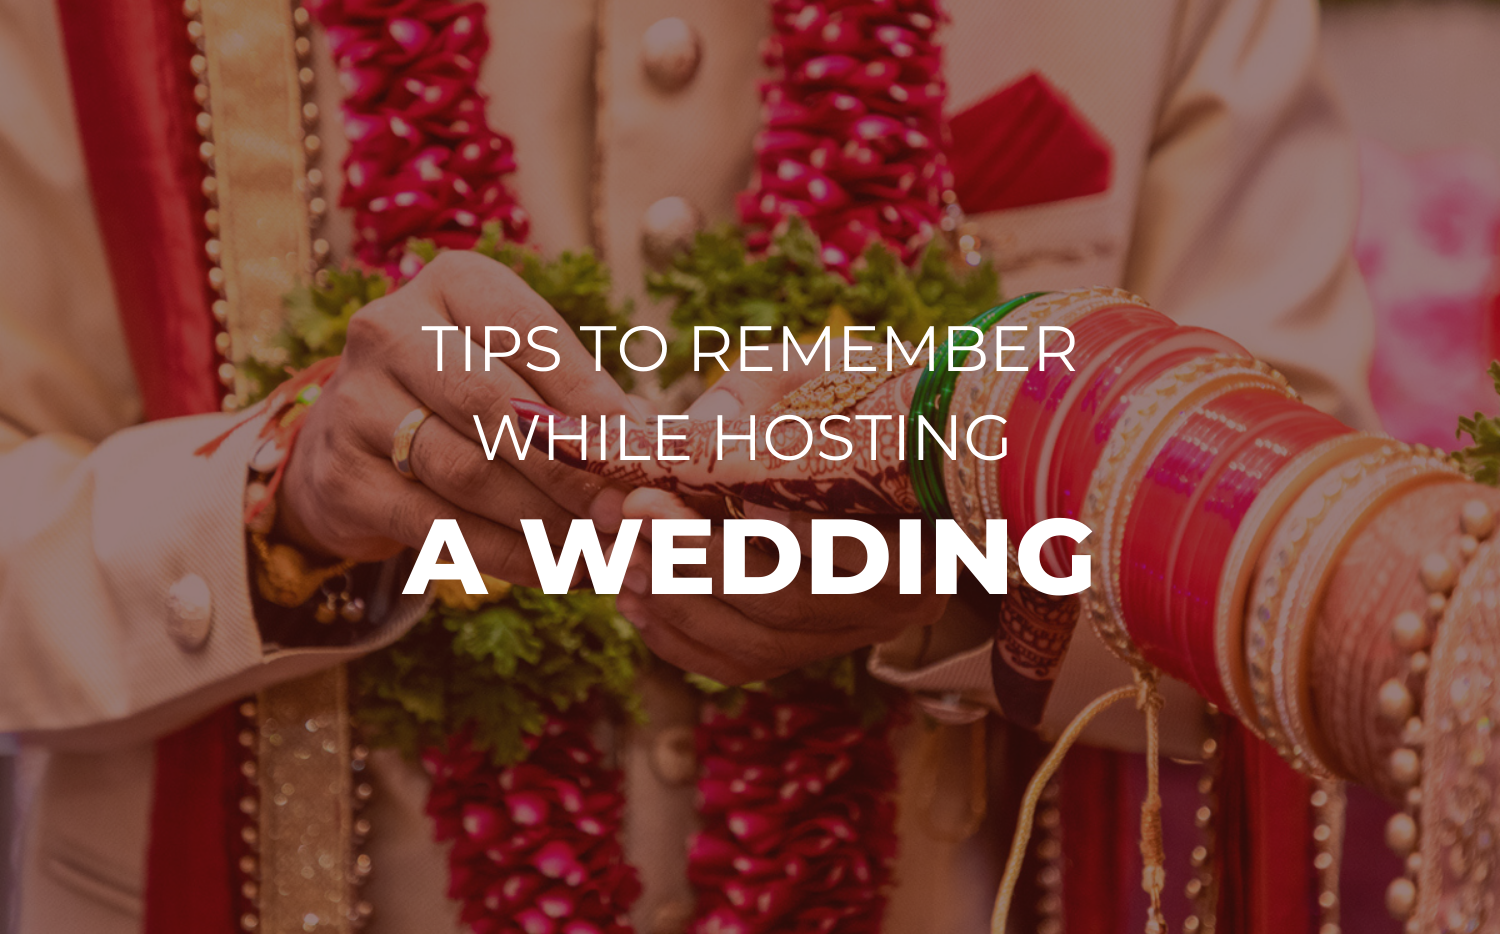 Tips To Remember While Hosting A Wedding During The Pandemic